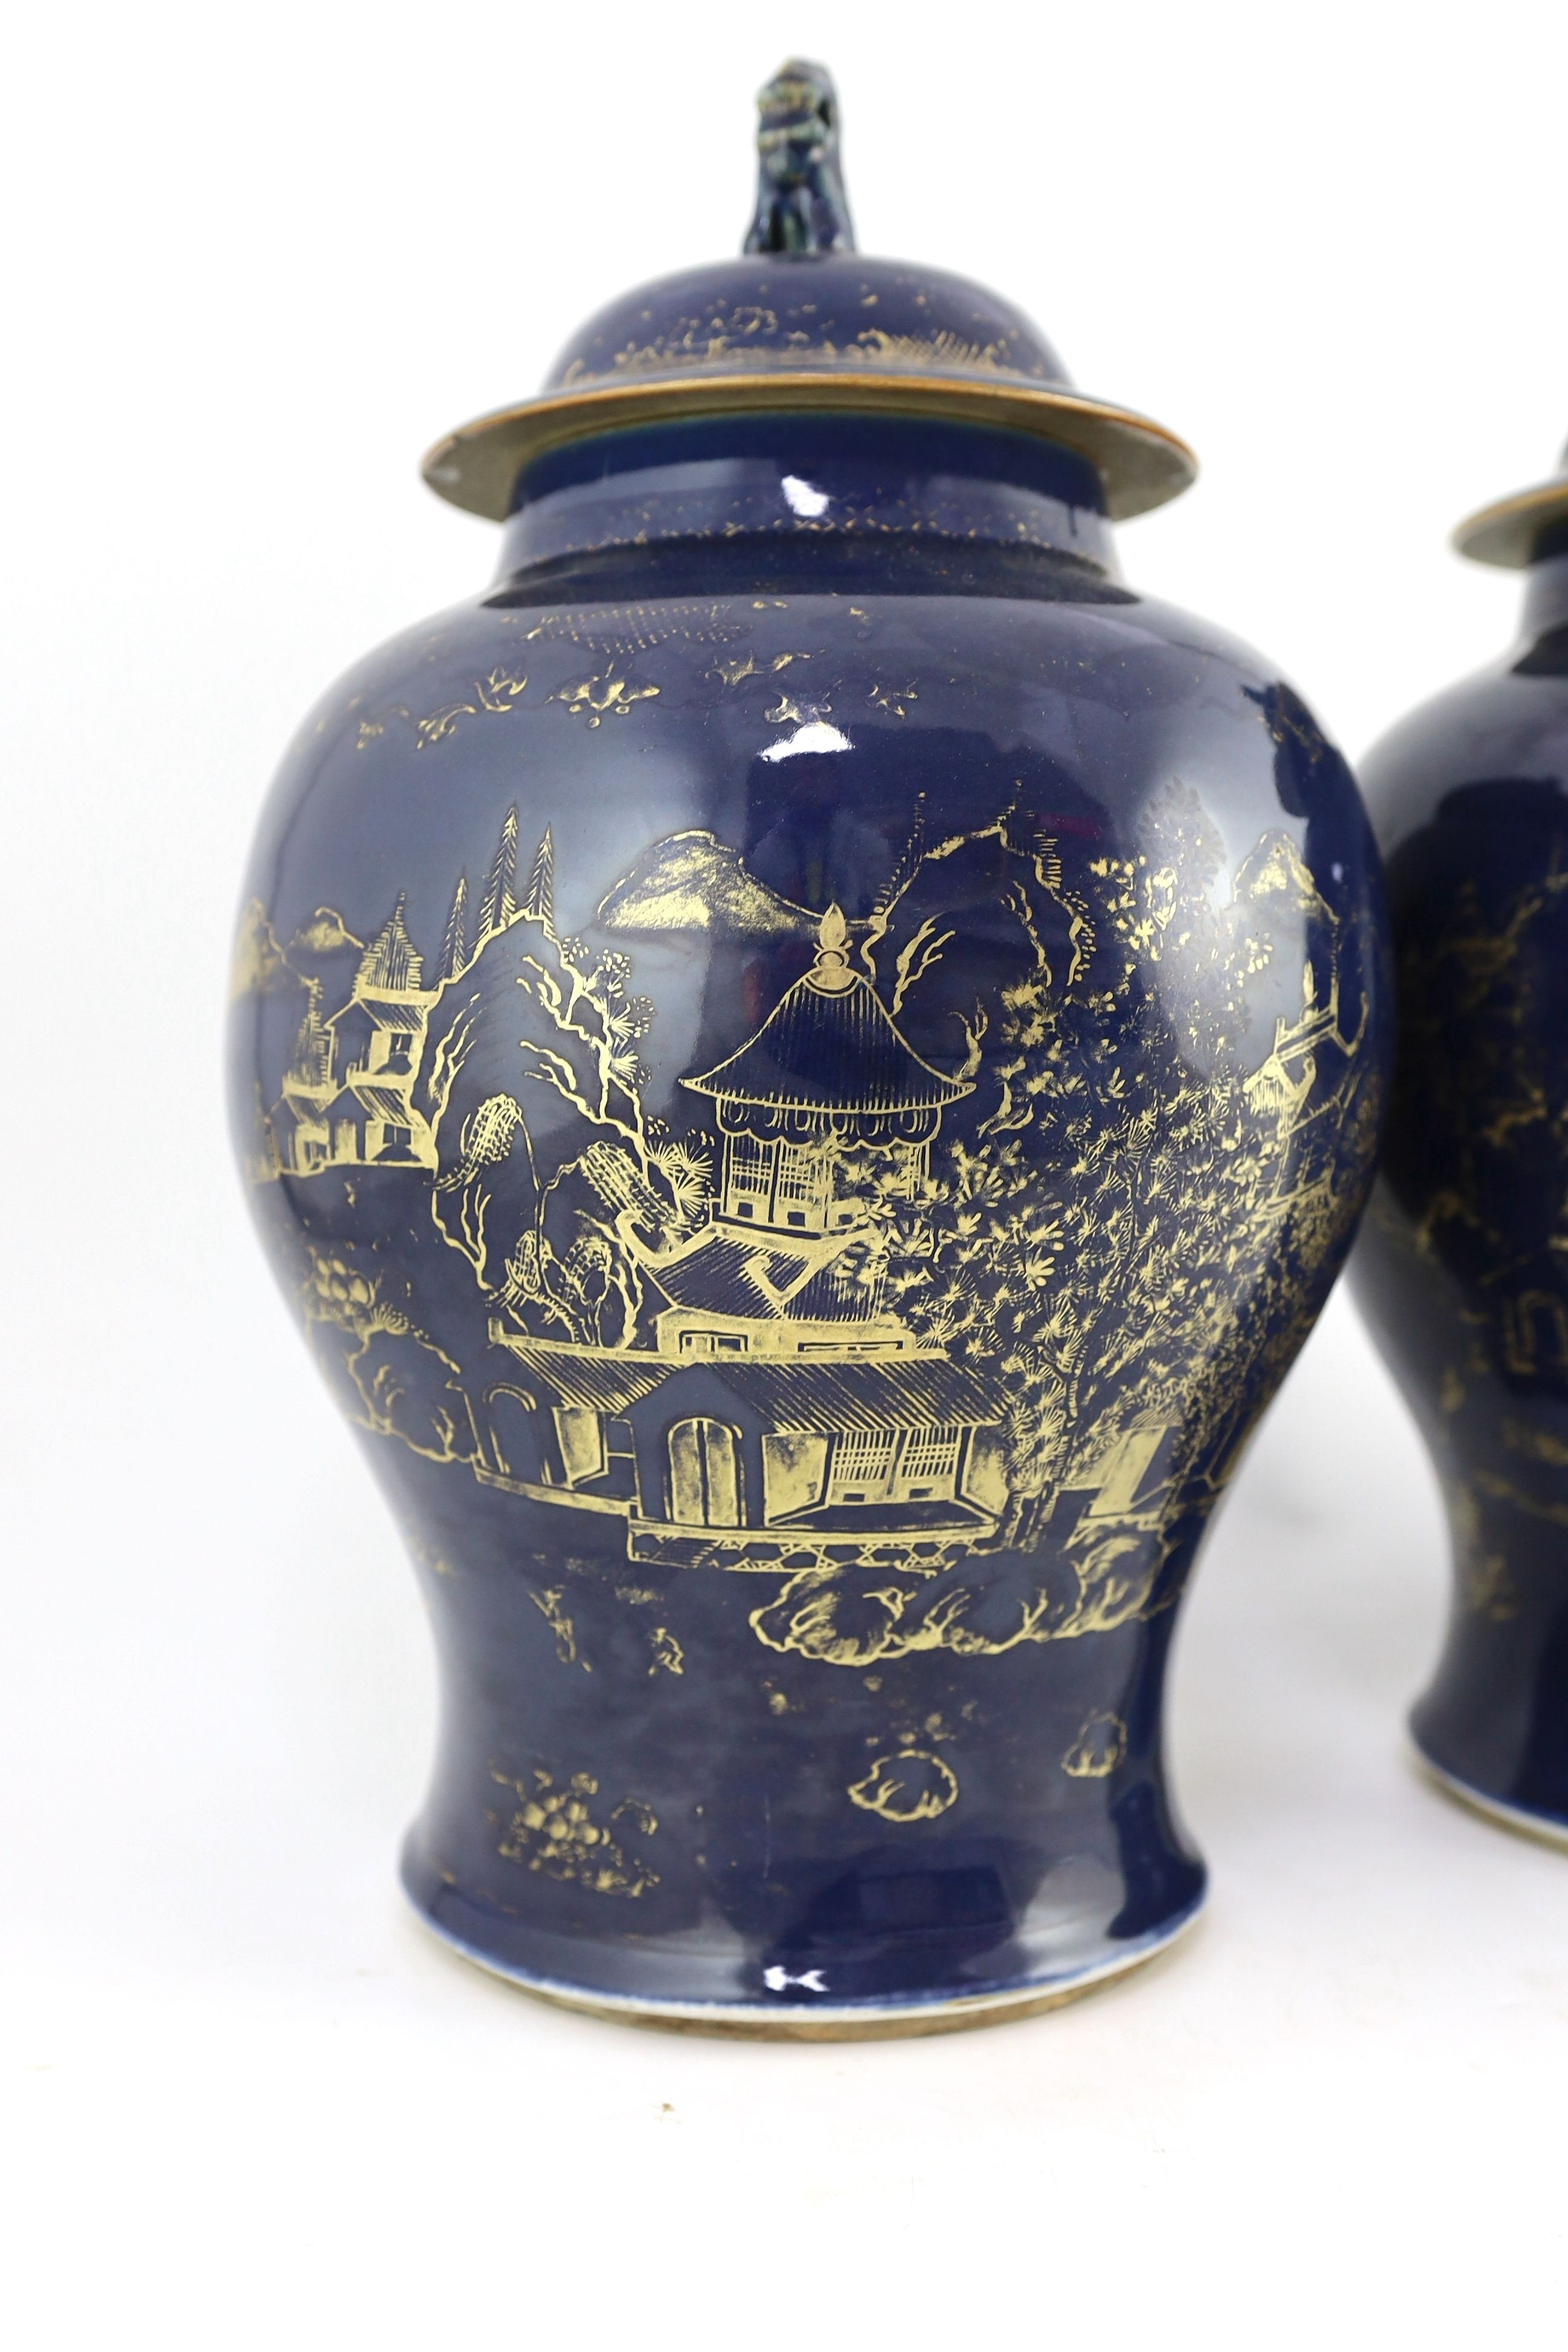 A pair of Chinese gilt-decorated blue ground baluster vases and covers, 19th century, 44 cm high